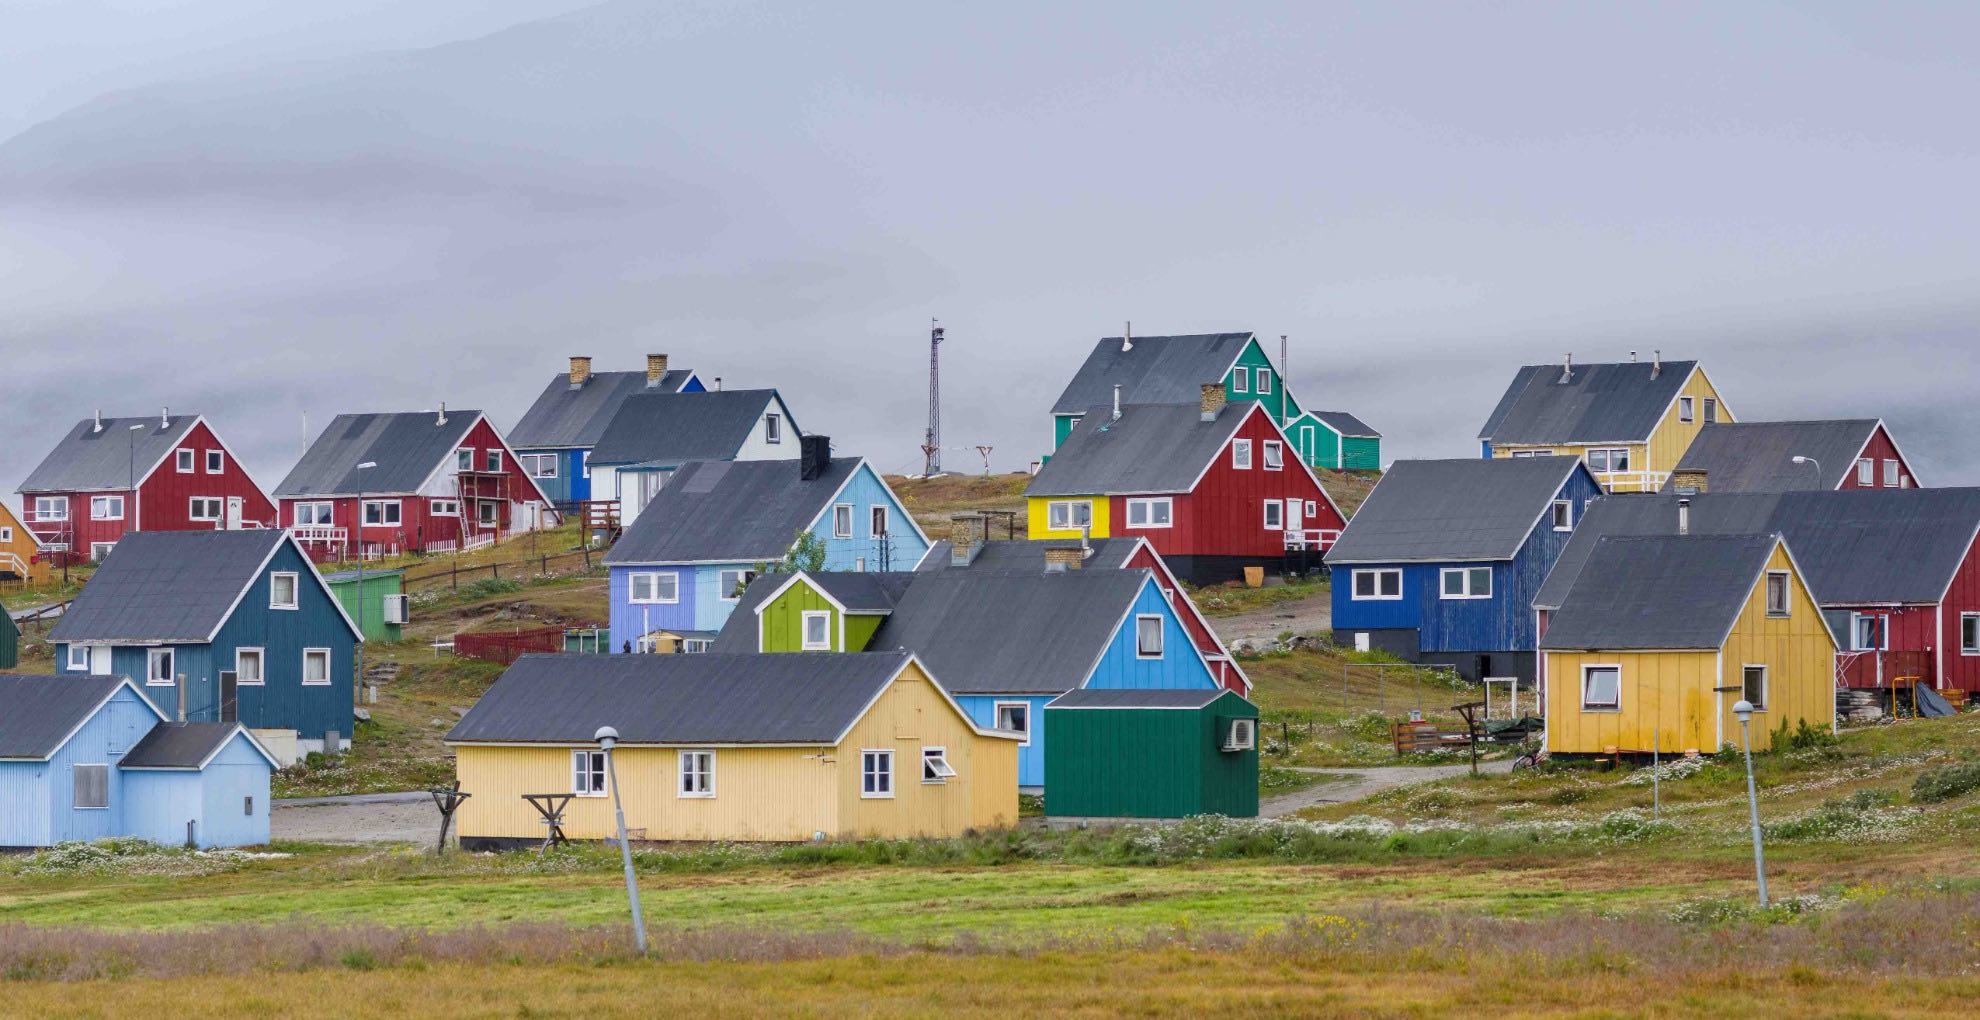 Colorful houses dot the foggy hillside in Narsaq, Greenland.